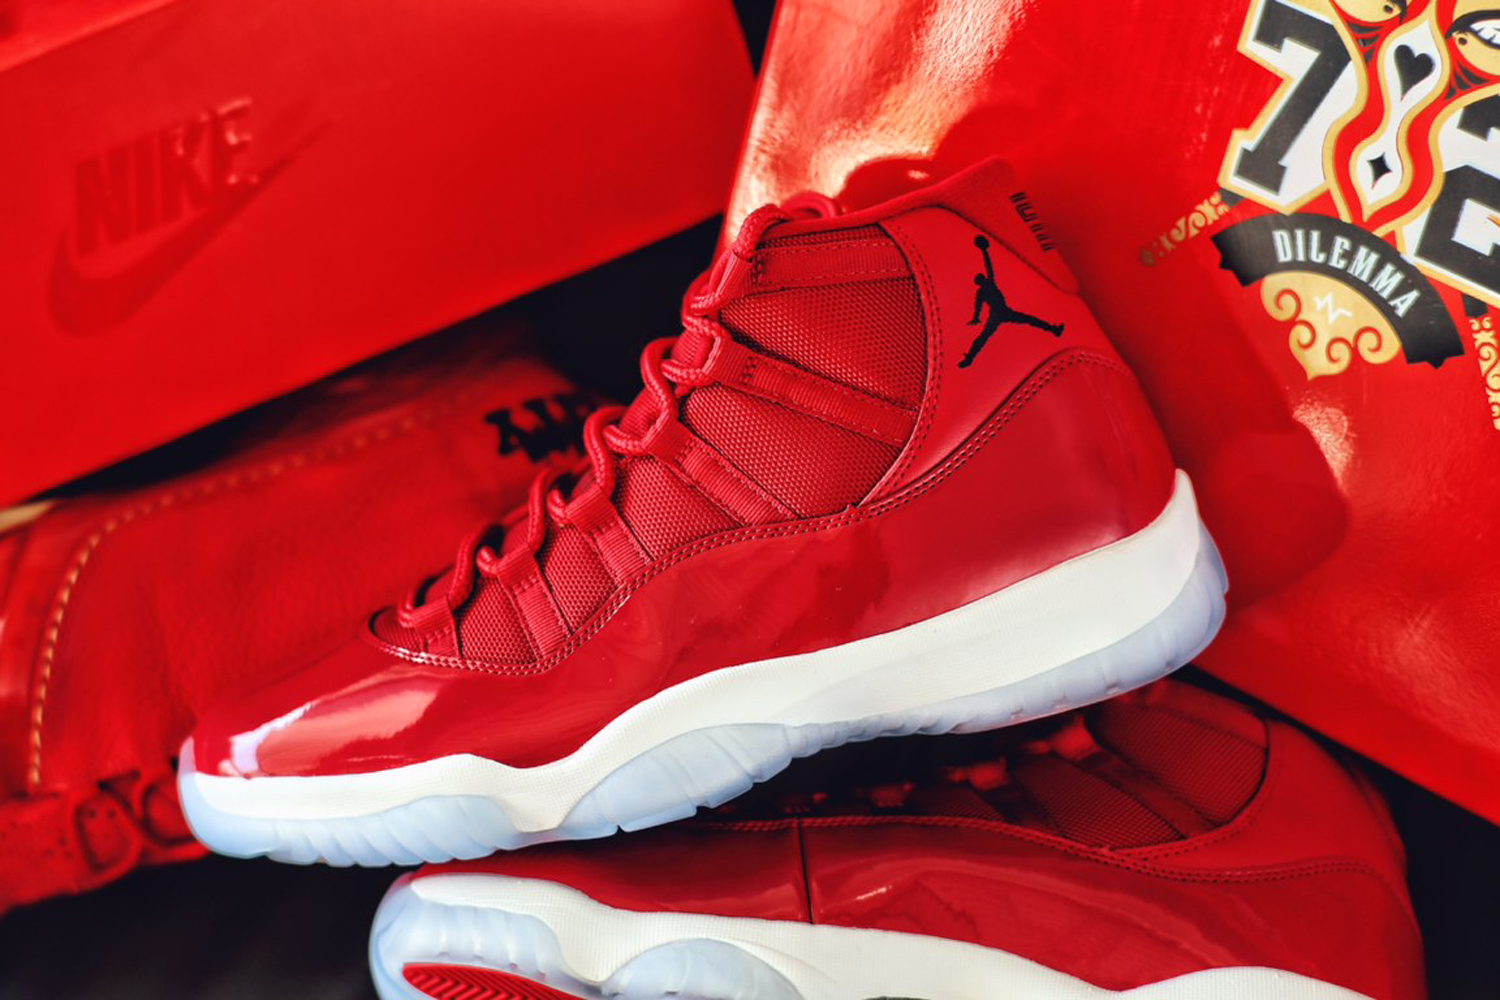 Up Close and Personal with the Air Jordan 11 'Win Like '96'